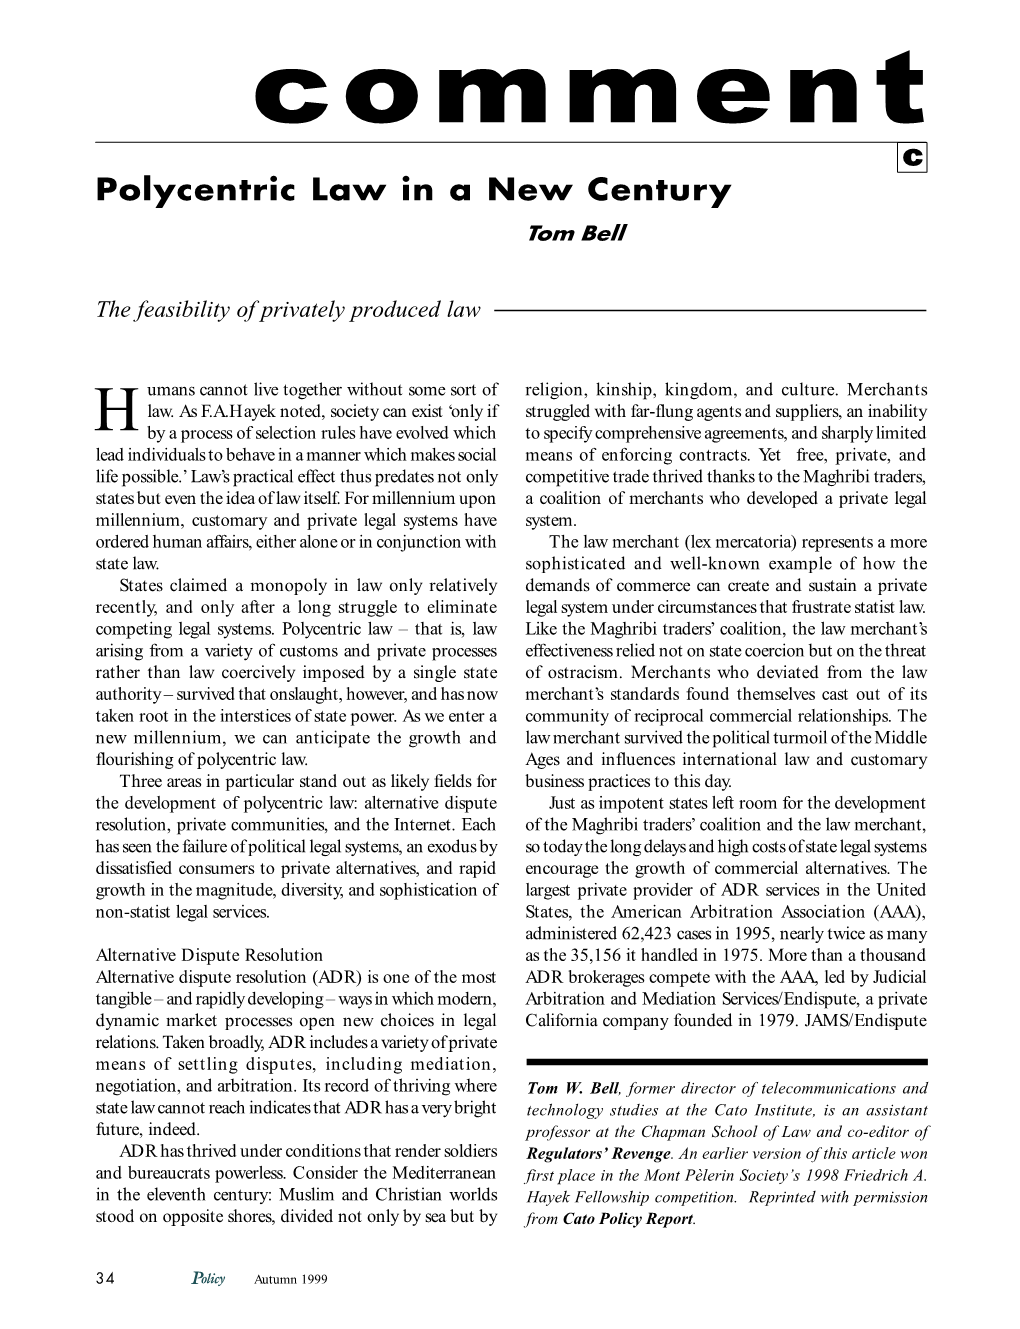 Polycentric Law in a New Century